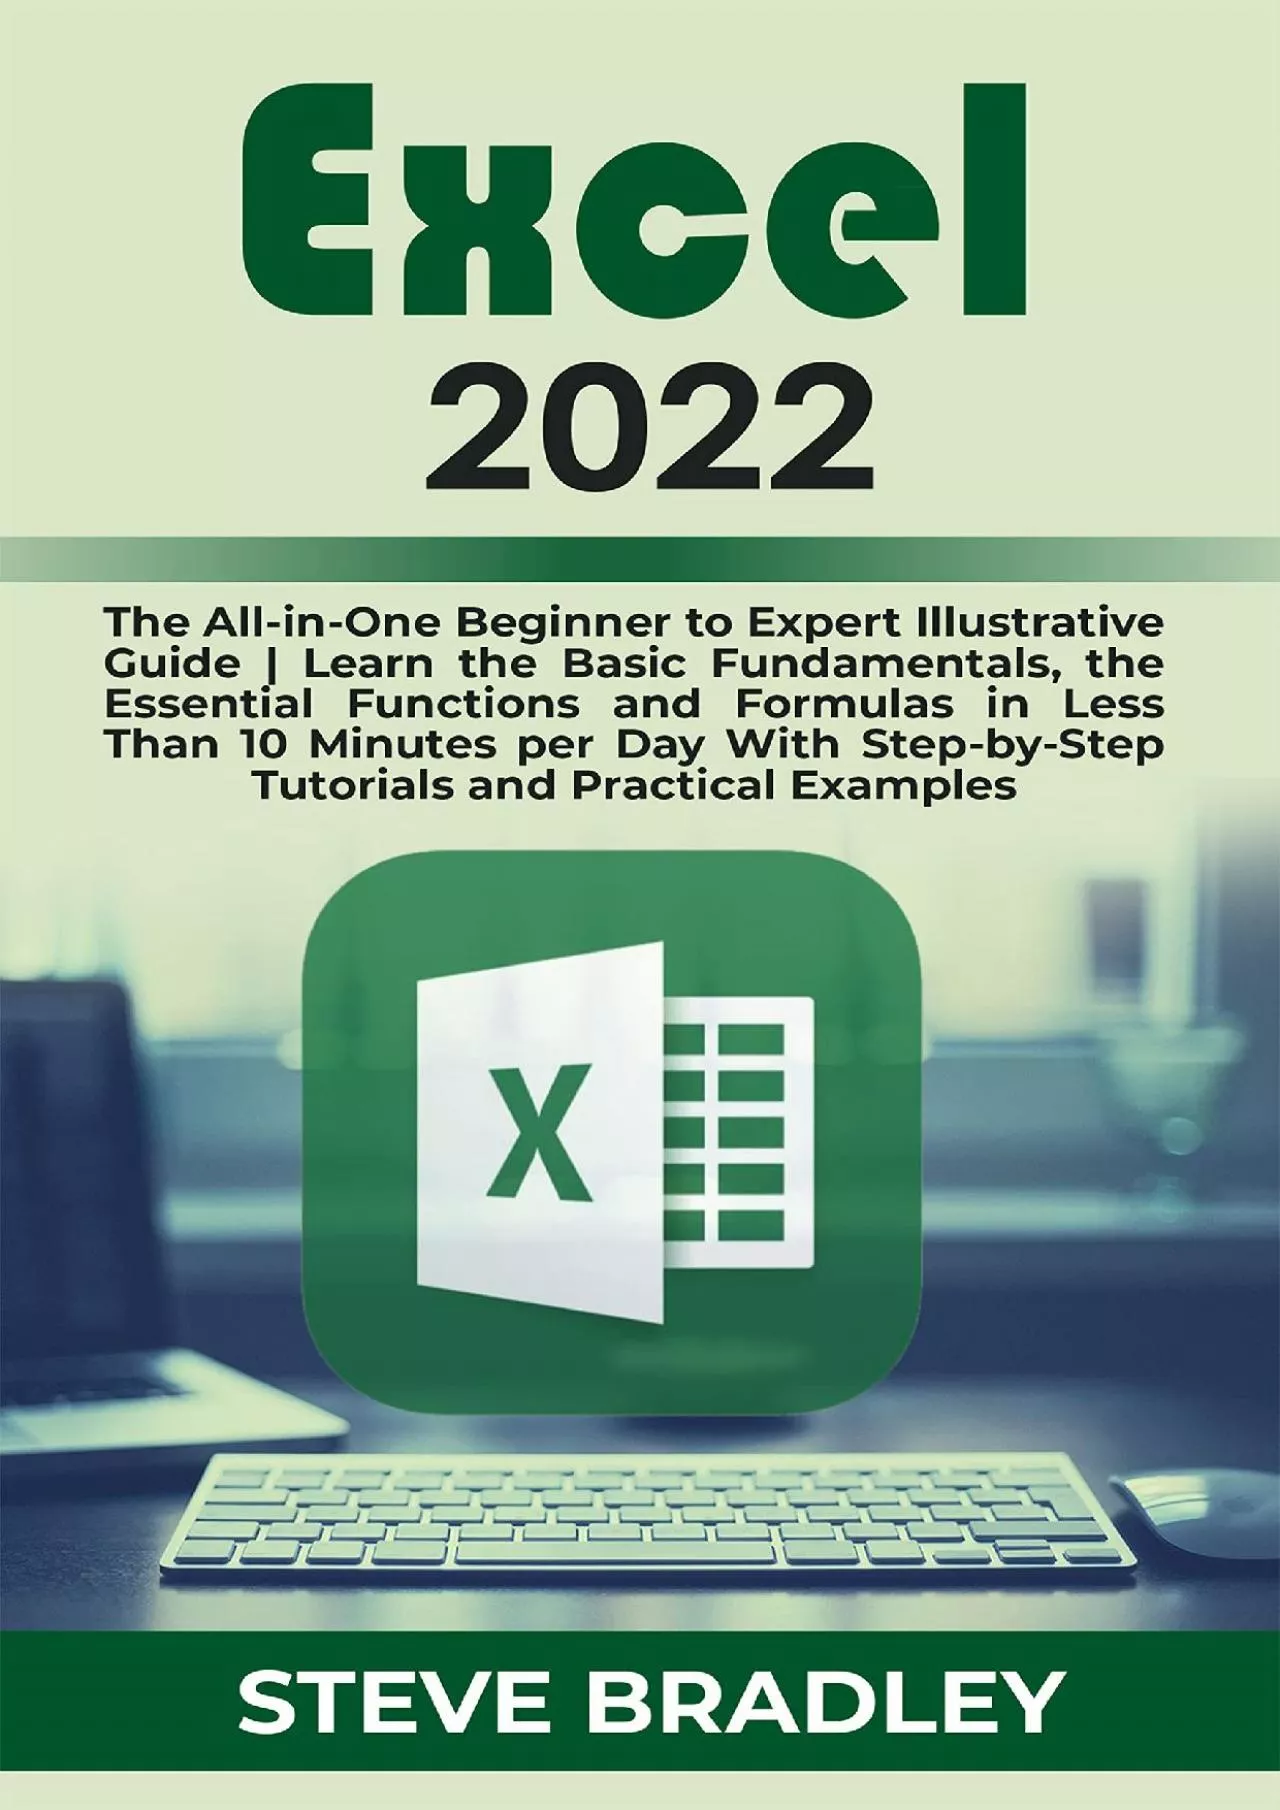 (EBOOK)-EXCEL 2022: The All-in-One Beginner to Expert Illustrative Guide | Learn the Basic